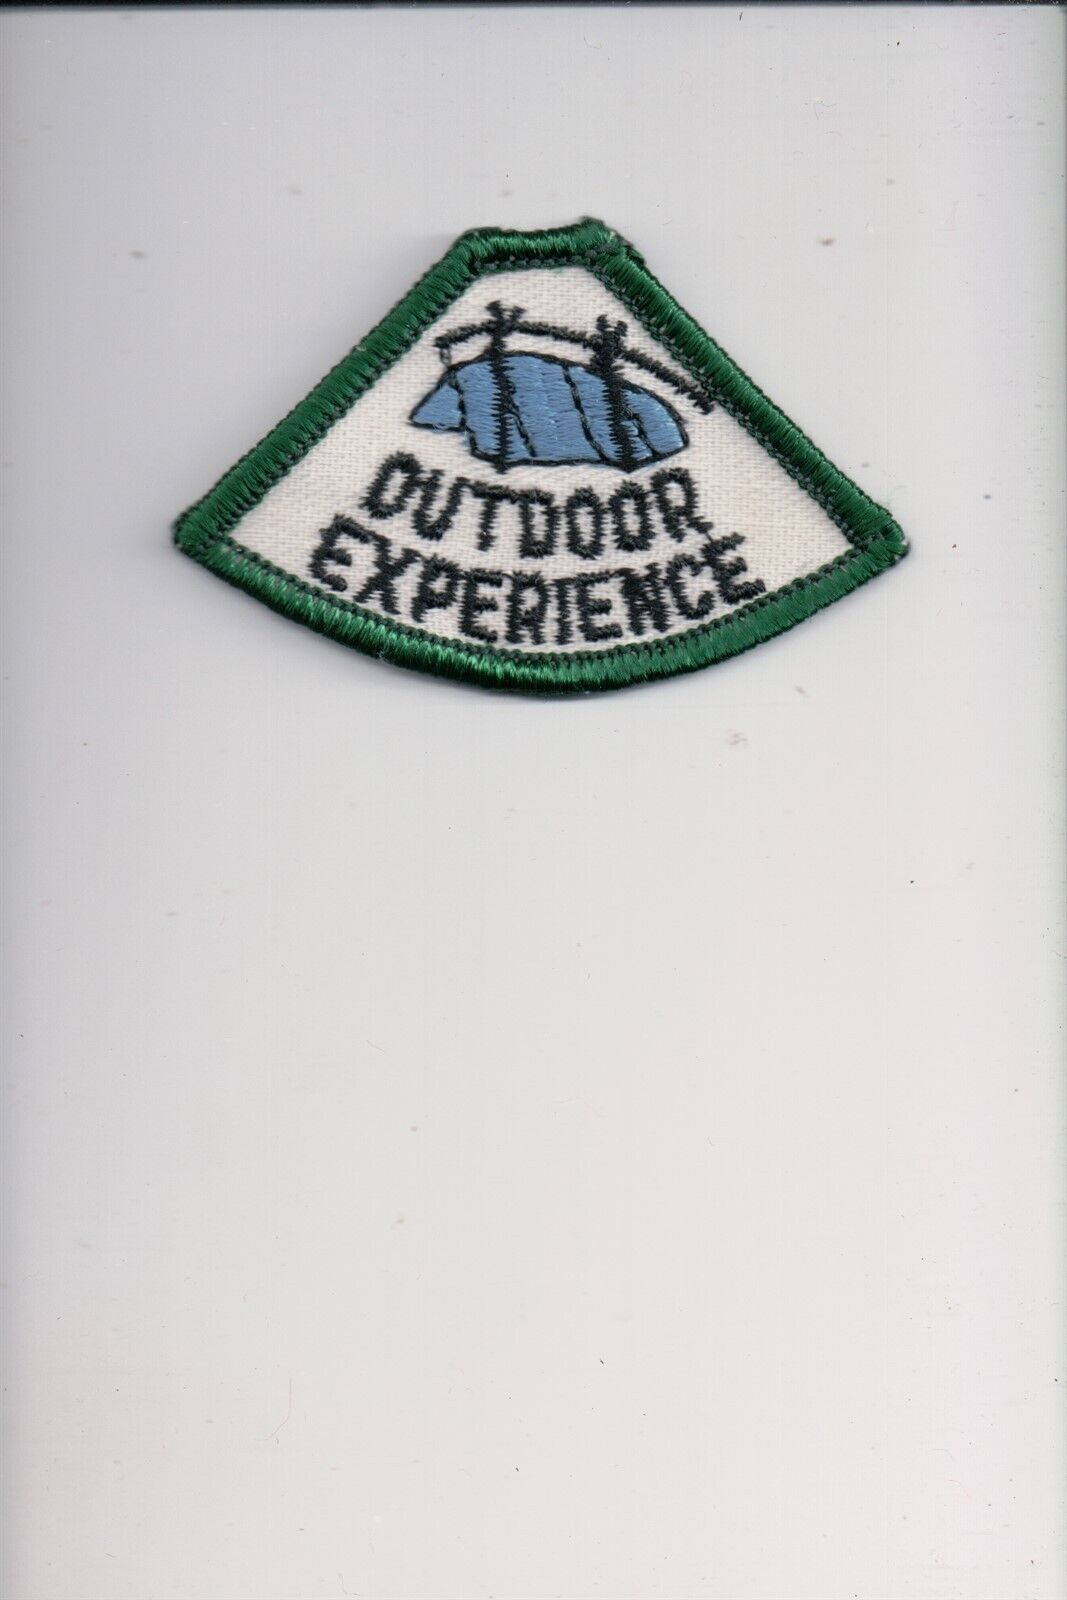 Outdoor Experience patch